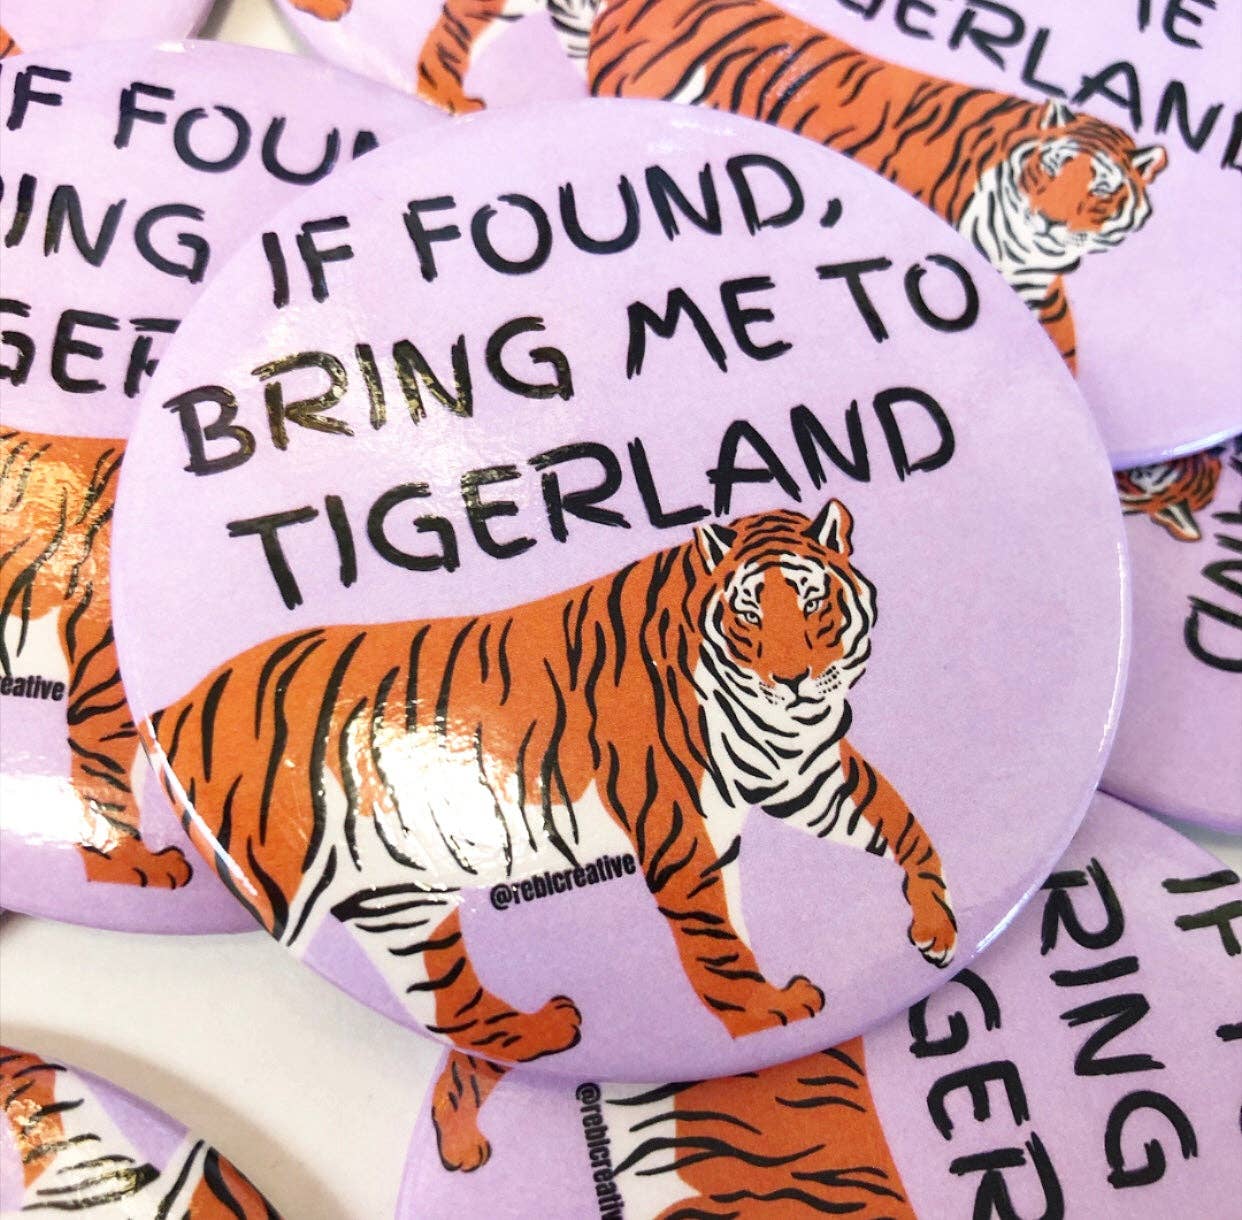 If found, bring me to REBL Creative's Tigerland game day button.